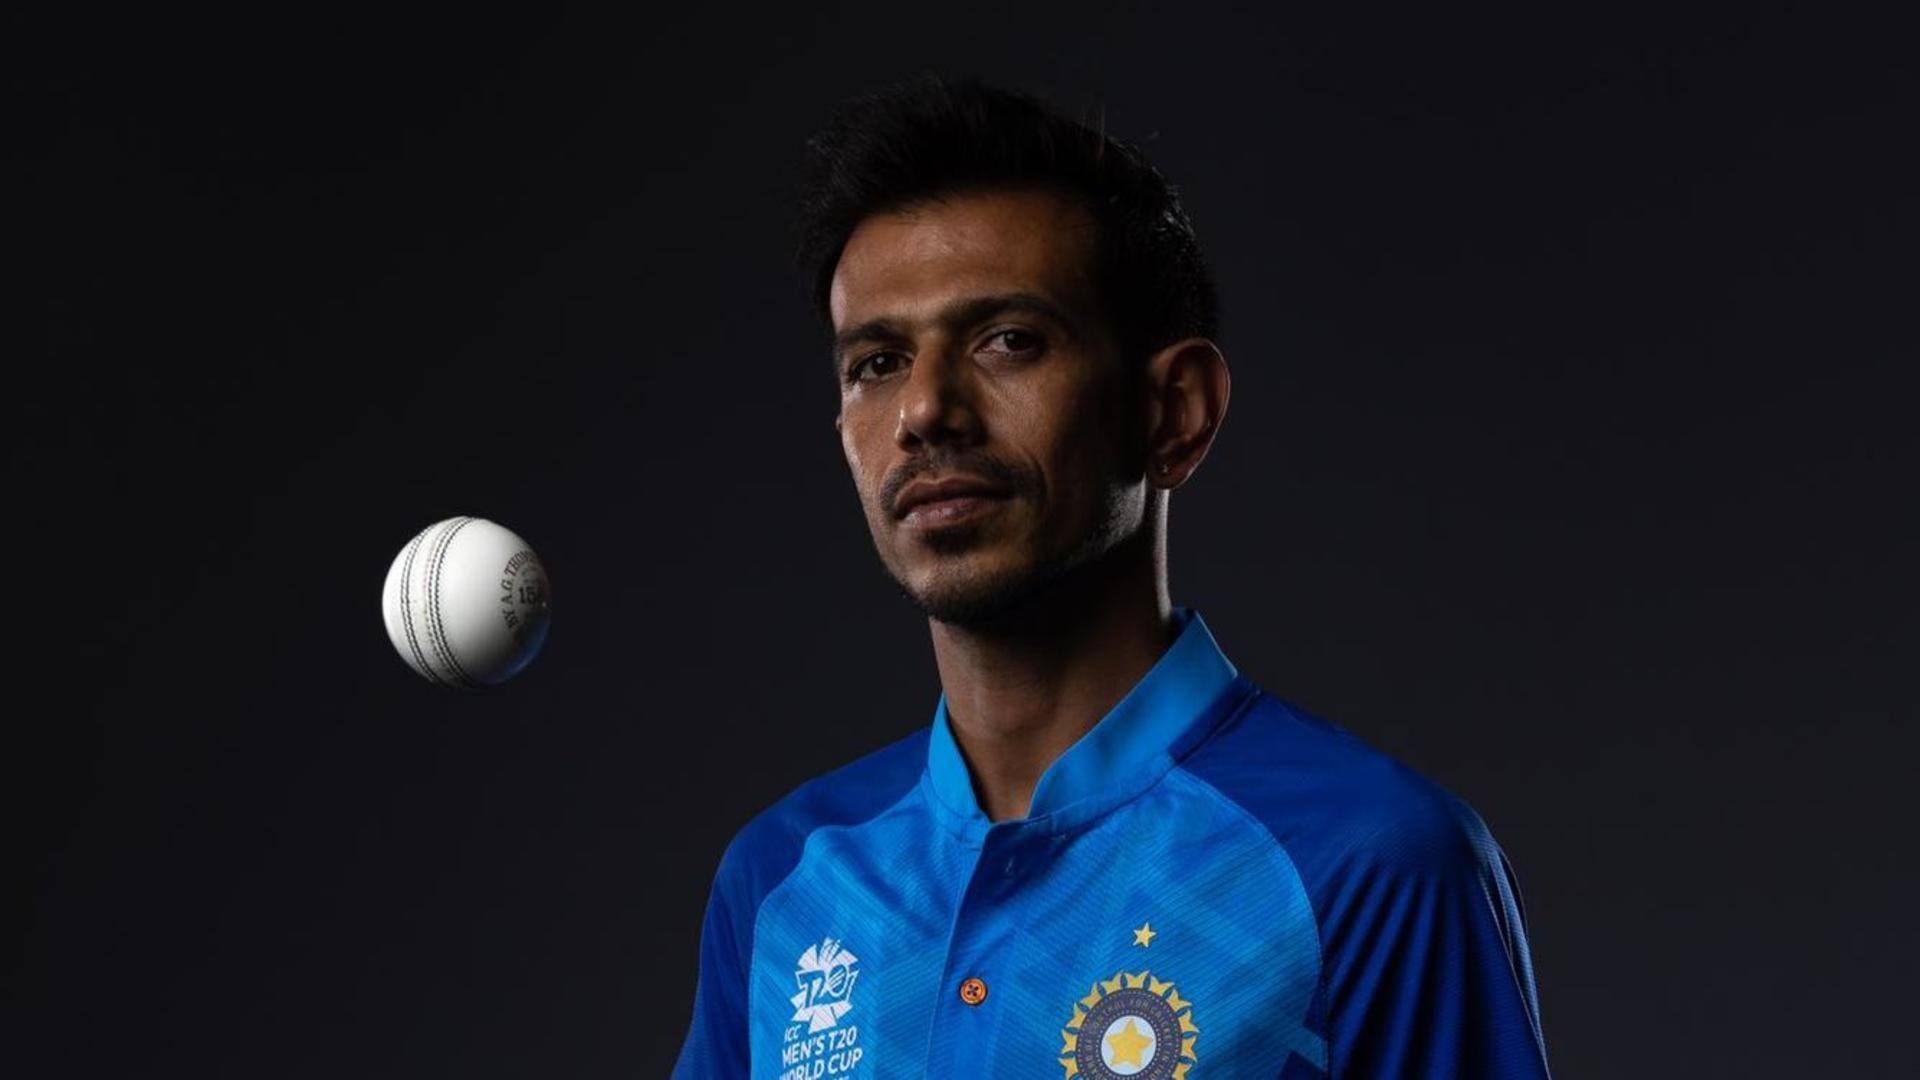 Yuzvendra Chahal to feature in Ranji Trophy 2022-23: Details here